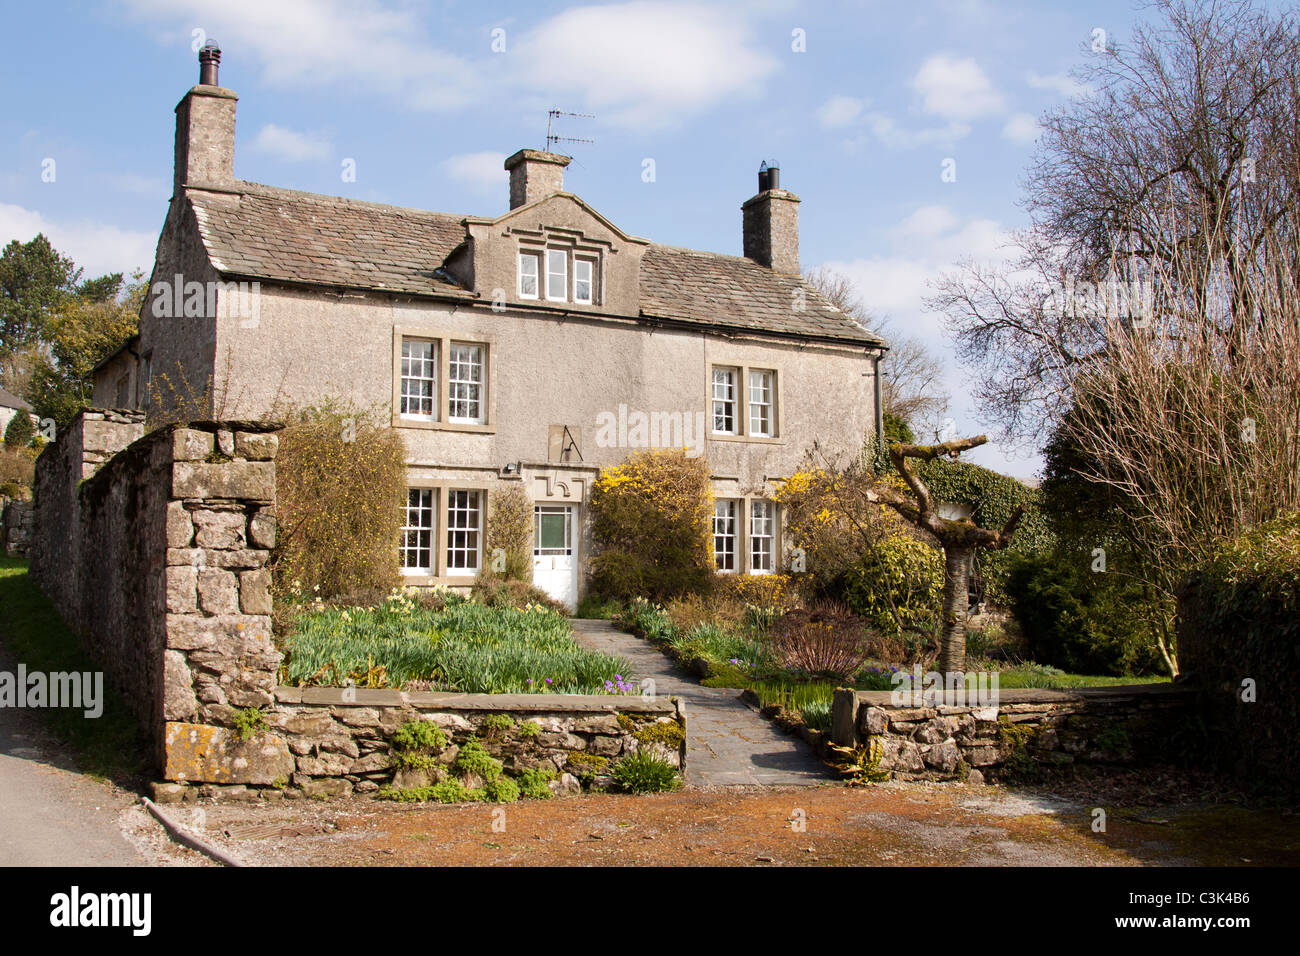 House in the village of Austwick, part of the Yorkshire Dales national park, England, UK Stock Photo